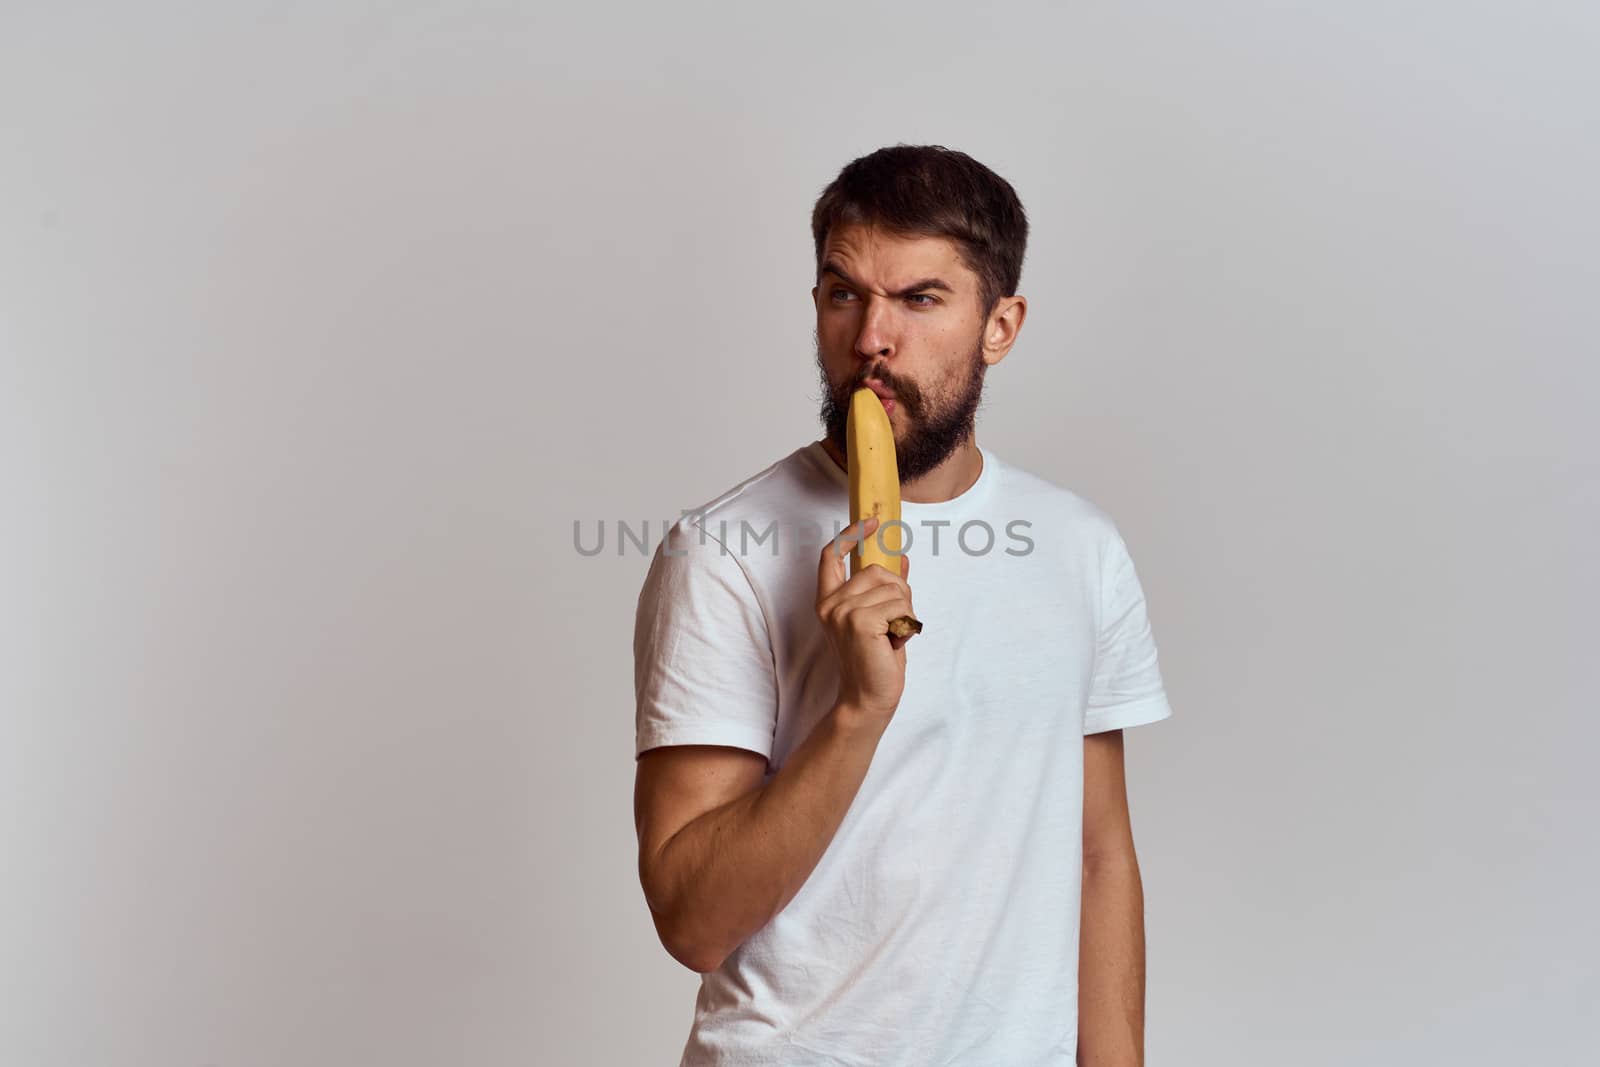 Cheerful man with a banana in his hands on a light background fun emotions Cropped view Copy Space. High quality photo